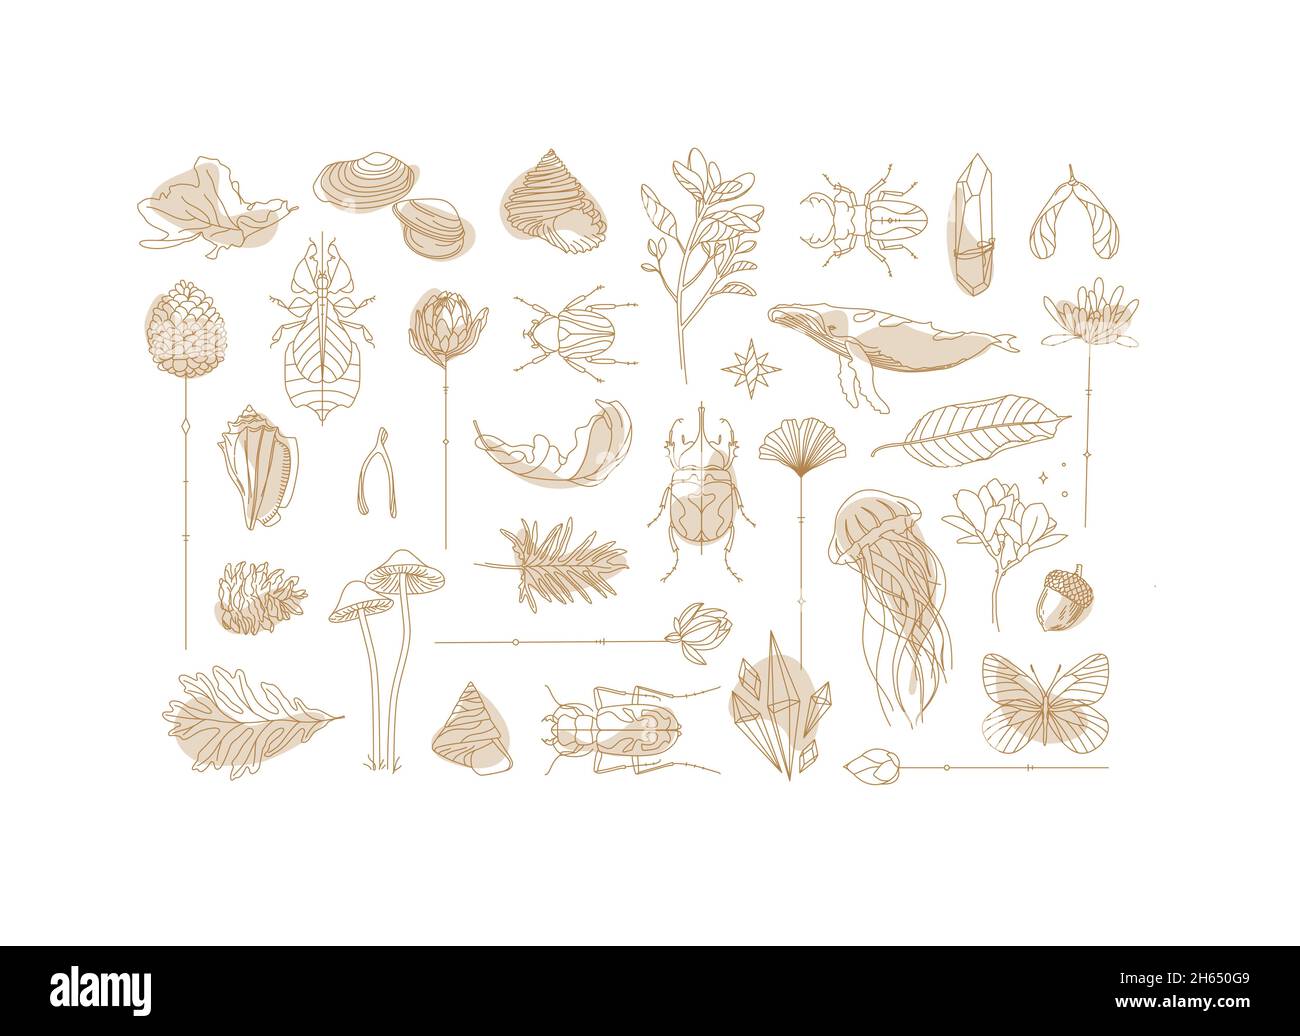 Art Deco flora and fauna collection drawing on white background Stock Vector